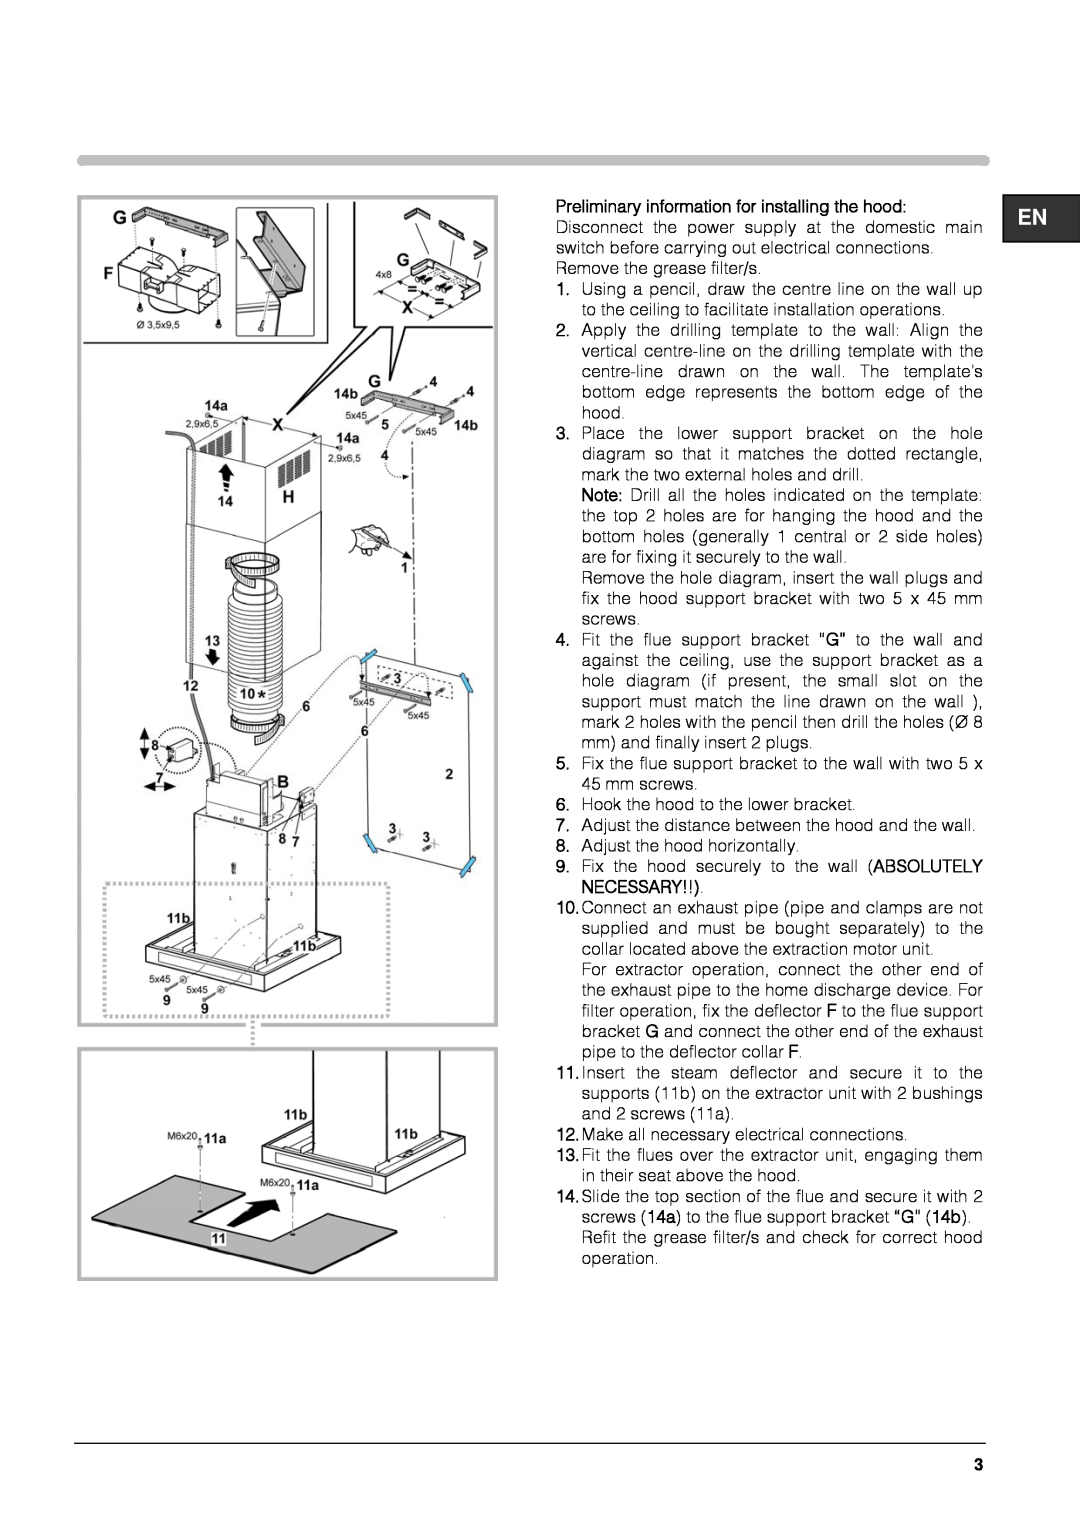 Hotpoint HTS93G manual Fix the flue support bracket to the wall with two 5 x 45 mm screws 